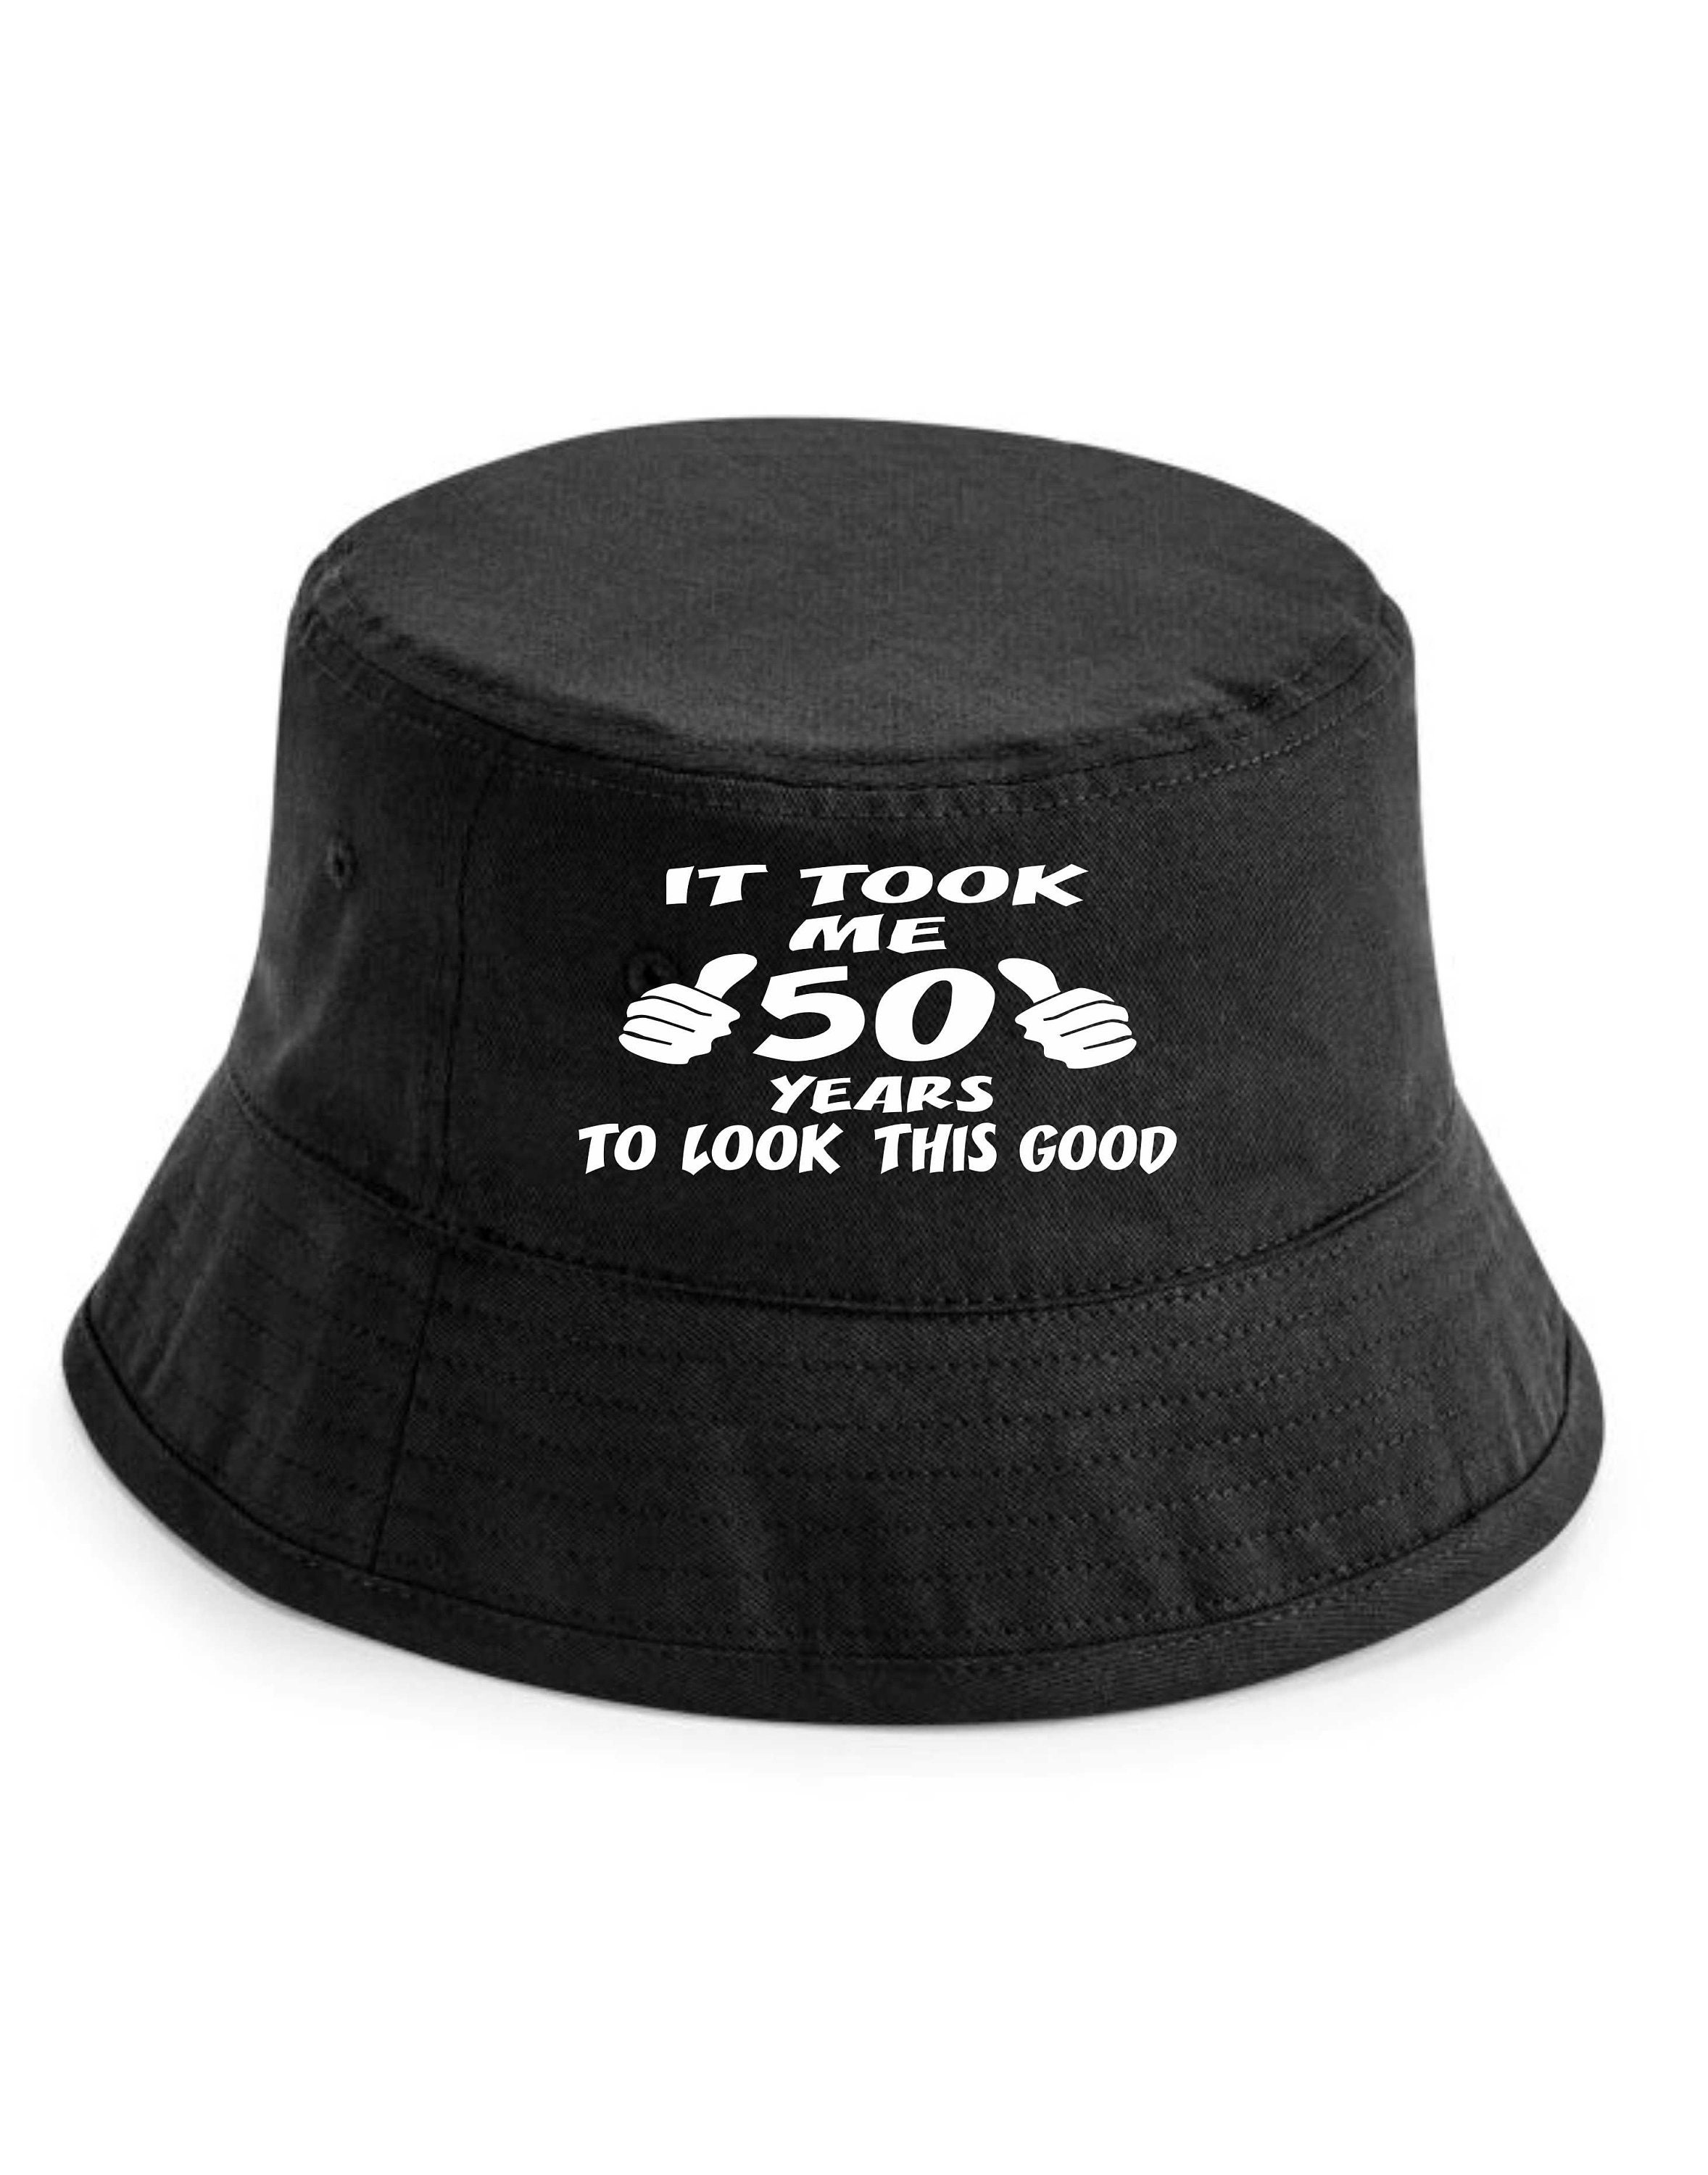 50 YEARS HAT 50 YEARS DOC GIFT 50 YEARS GADGET FIFTY YEARS PARTY 50 YEARS